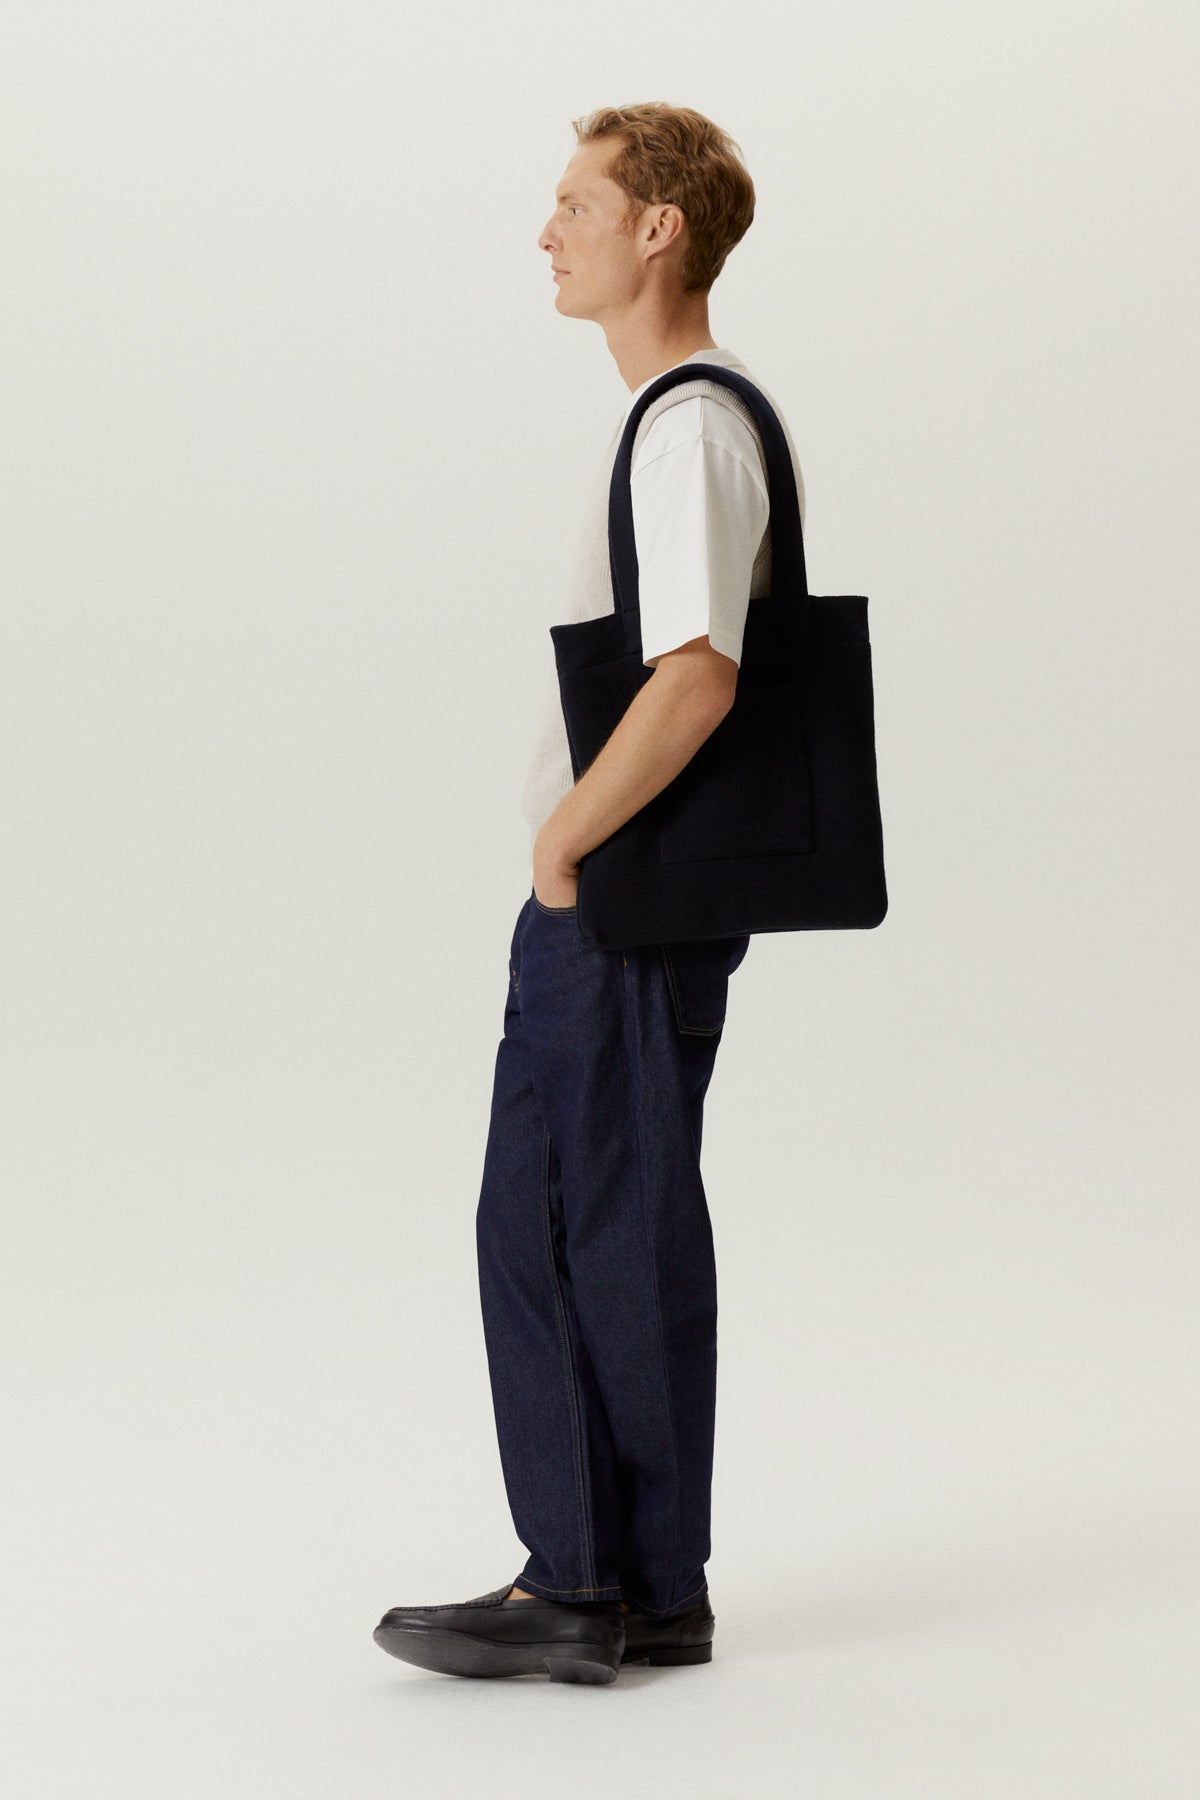 the knit tote bag abyss blue